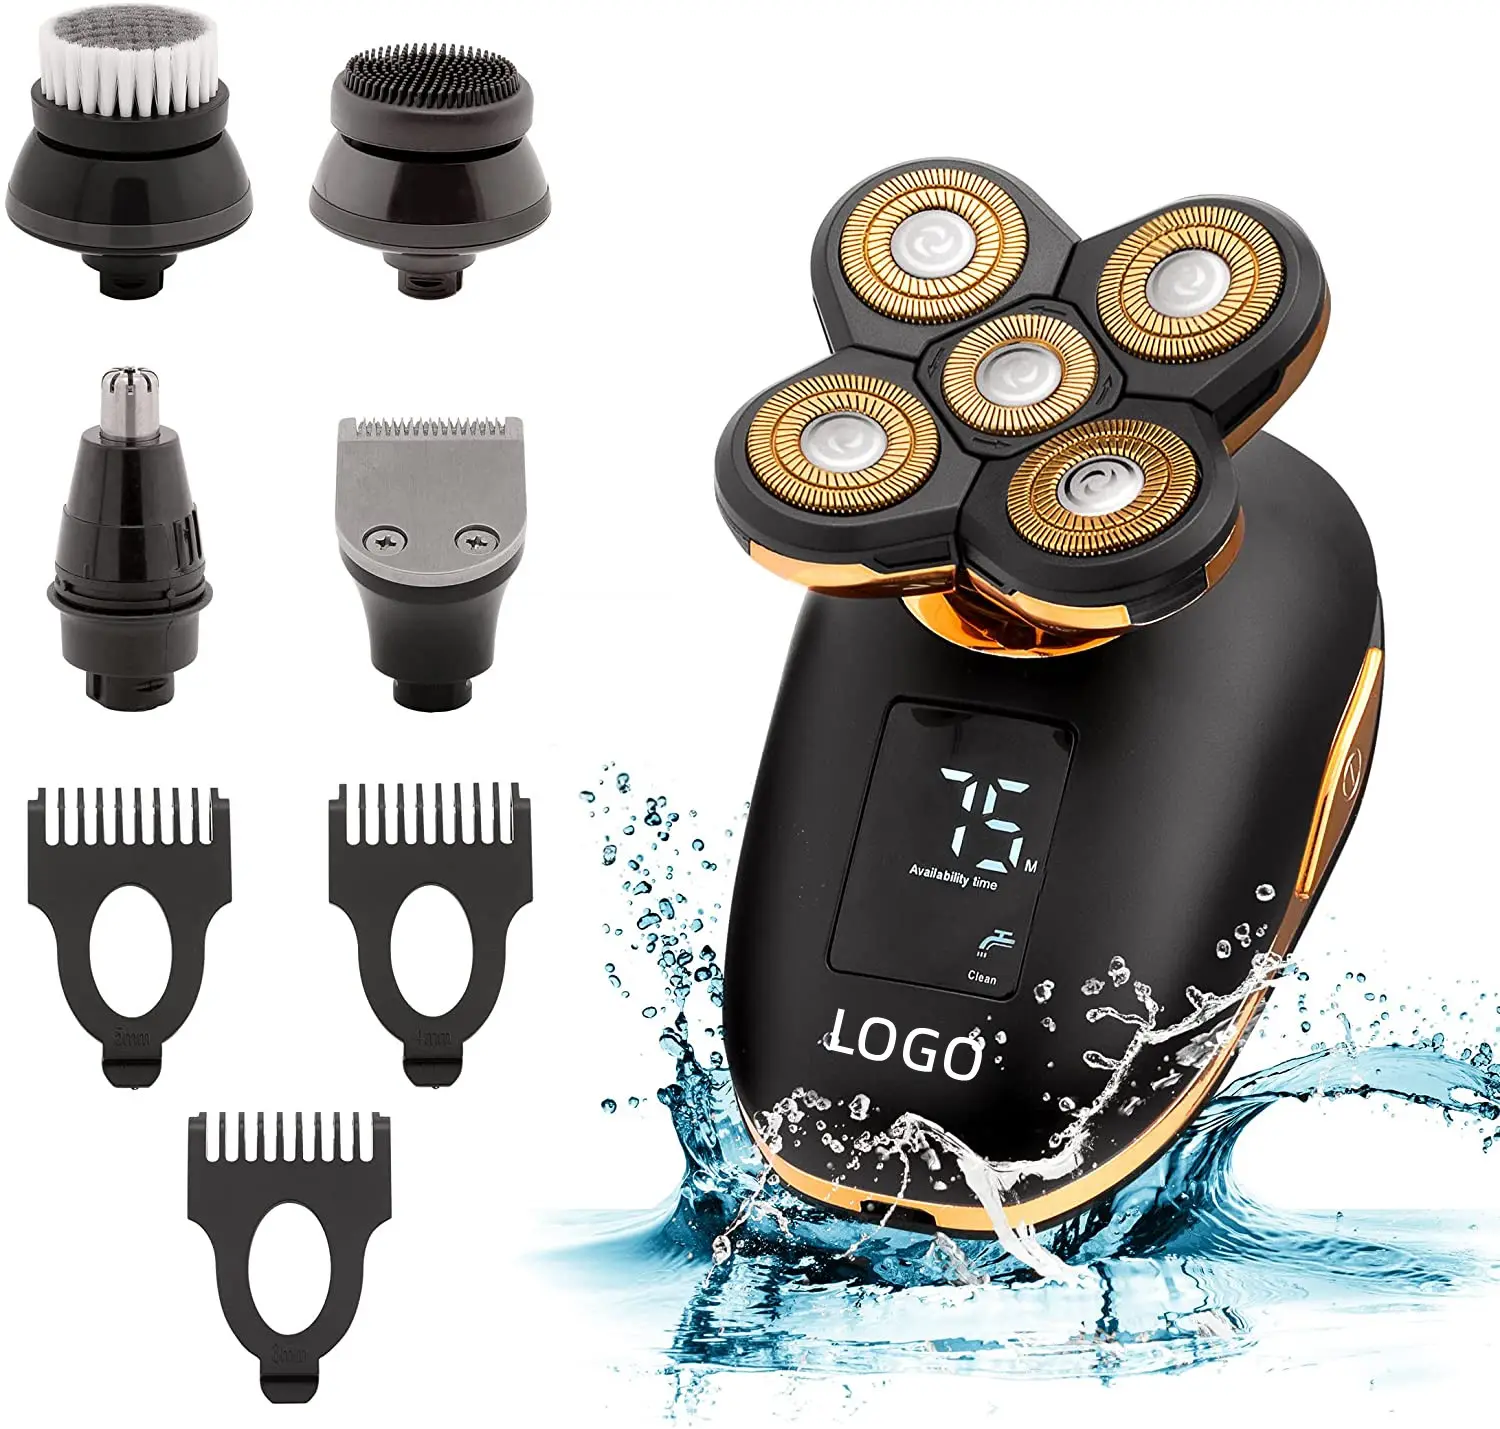 5 in 1 Head Shavers Hair Clippers Waterproof USB Rechargeable Cordless Electric Rotary Razor Beard Trimmer Grooming Kit for Men